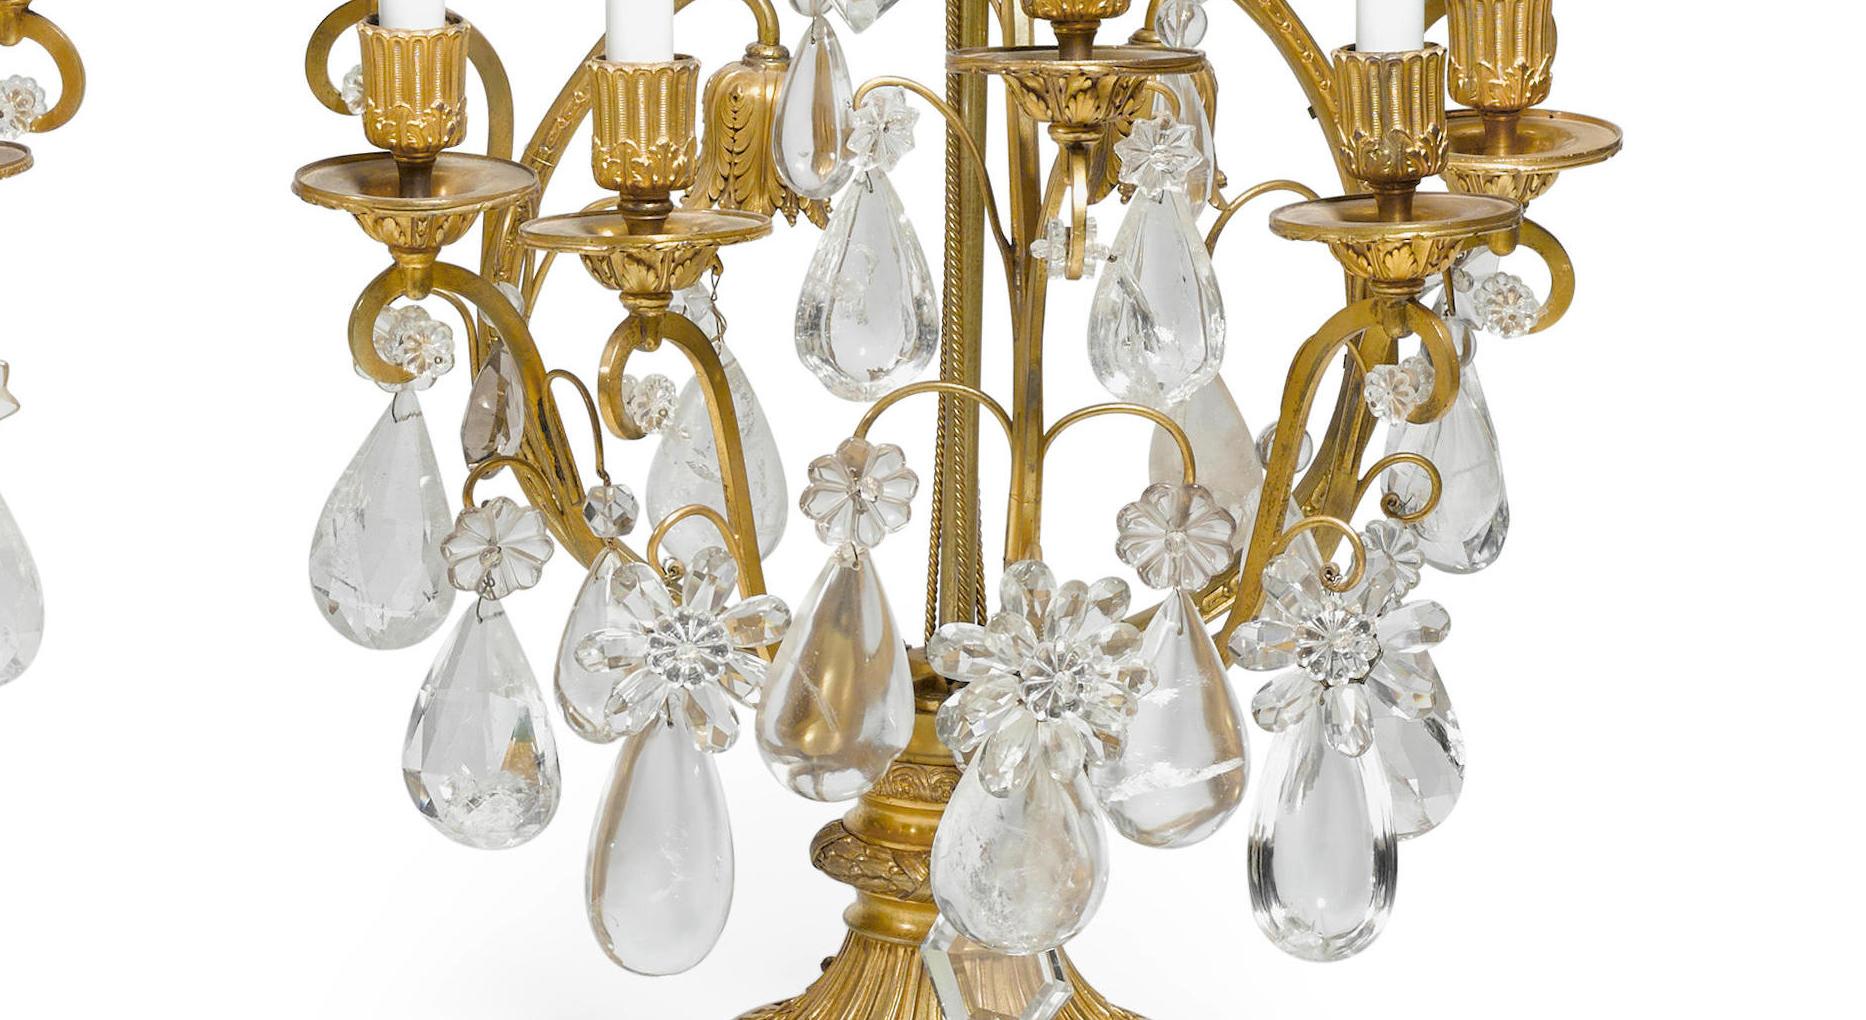 Hand-Carved Pair of French Rock Crystal and Ormolu Girandole Candelabra, 19th Century